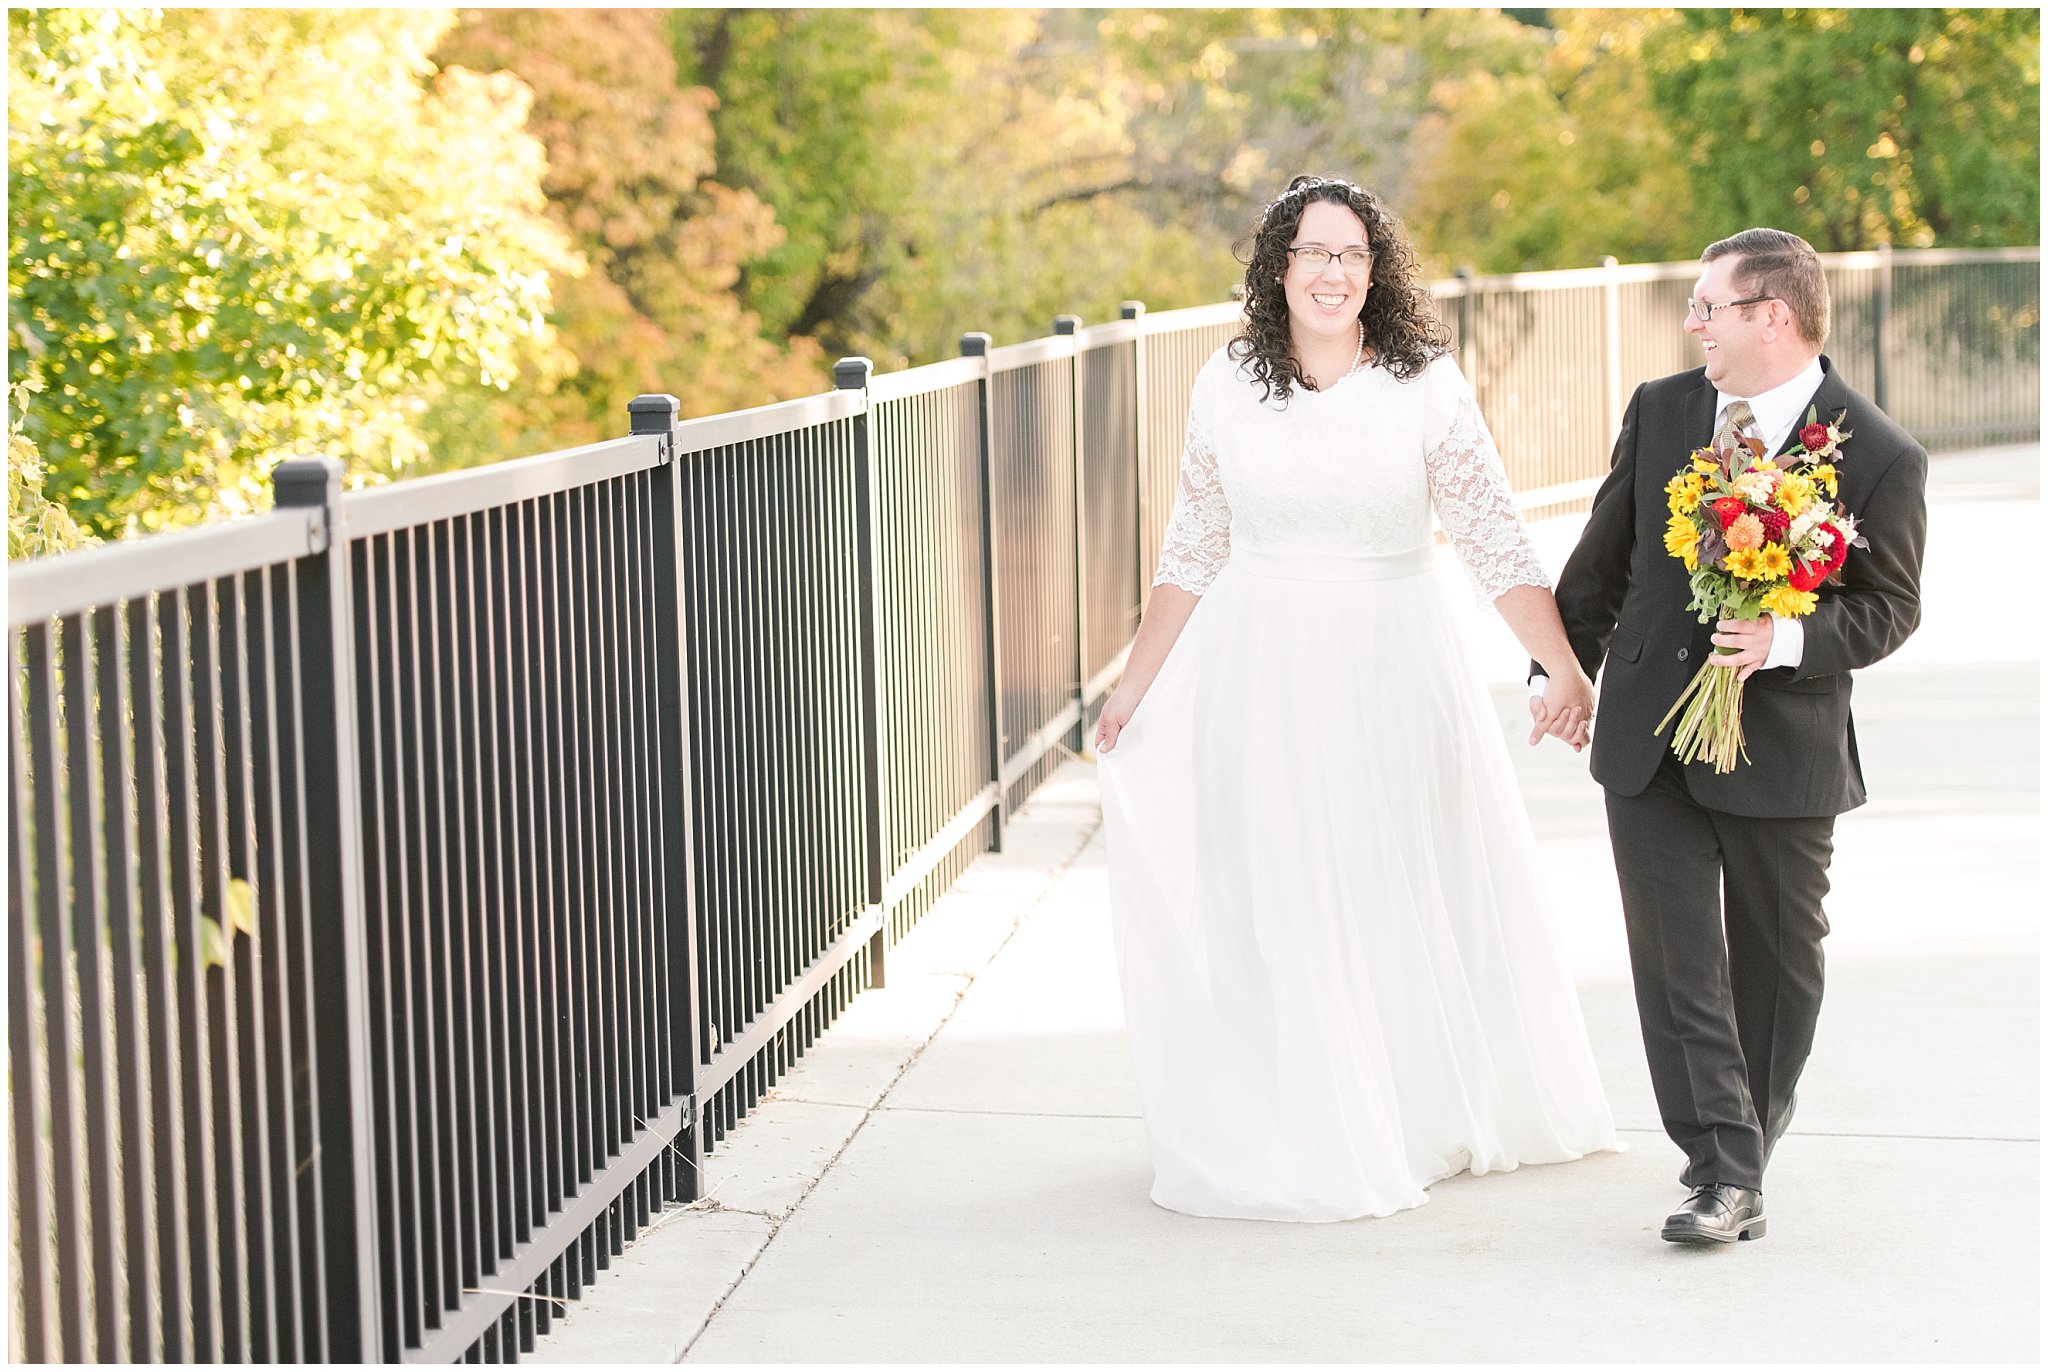 Groom in black suit and gold tie, bride in simple lace sleeve wedding dress with fall bouquet | Logan Temple Fall Formal Session | Jessie and Dallin Photography